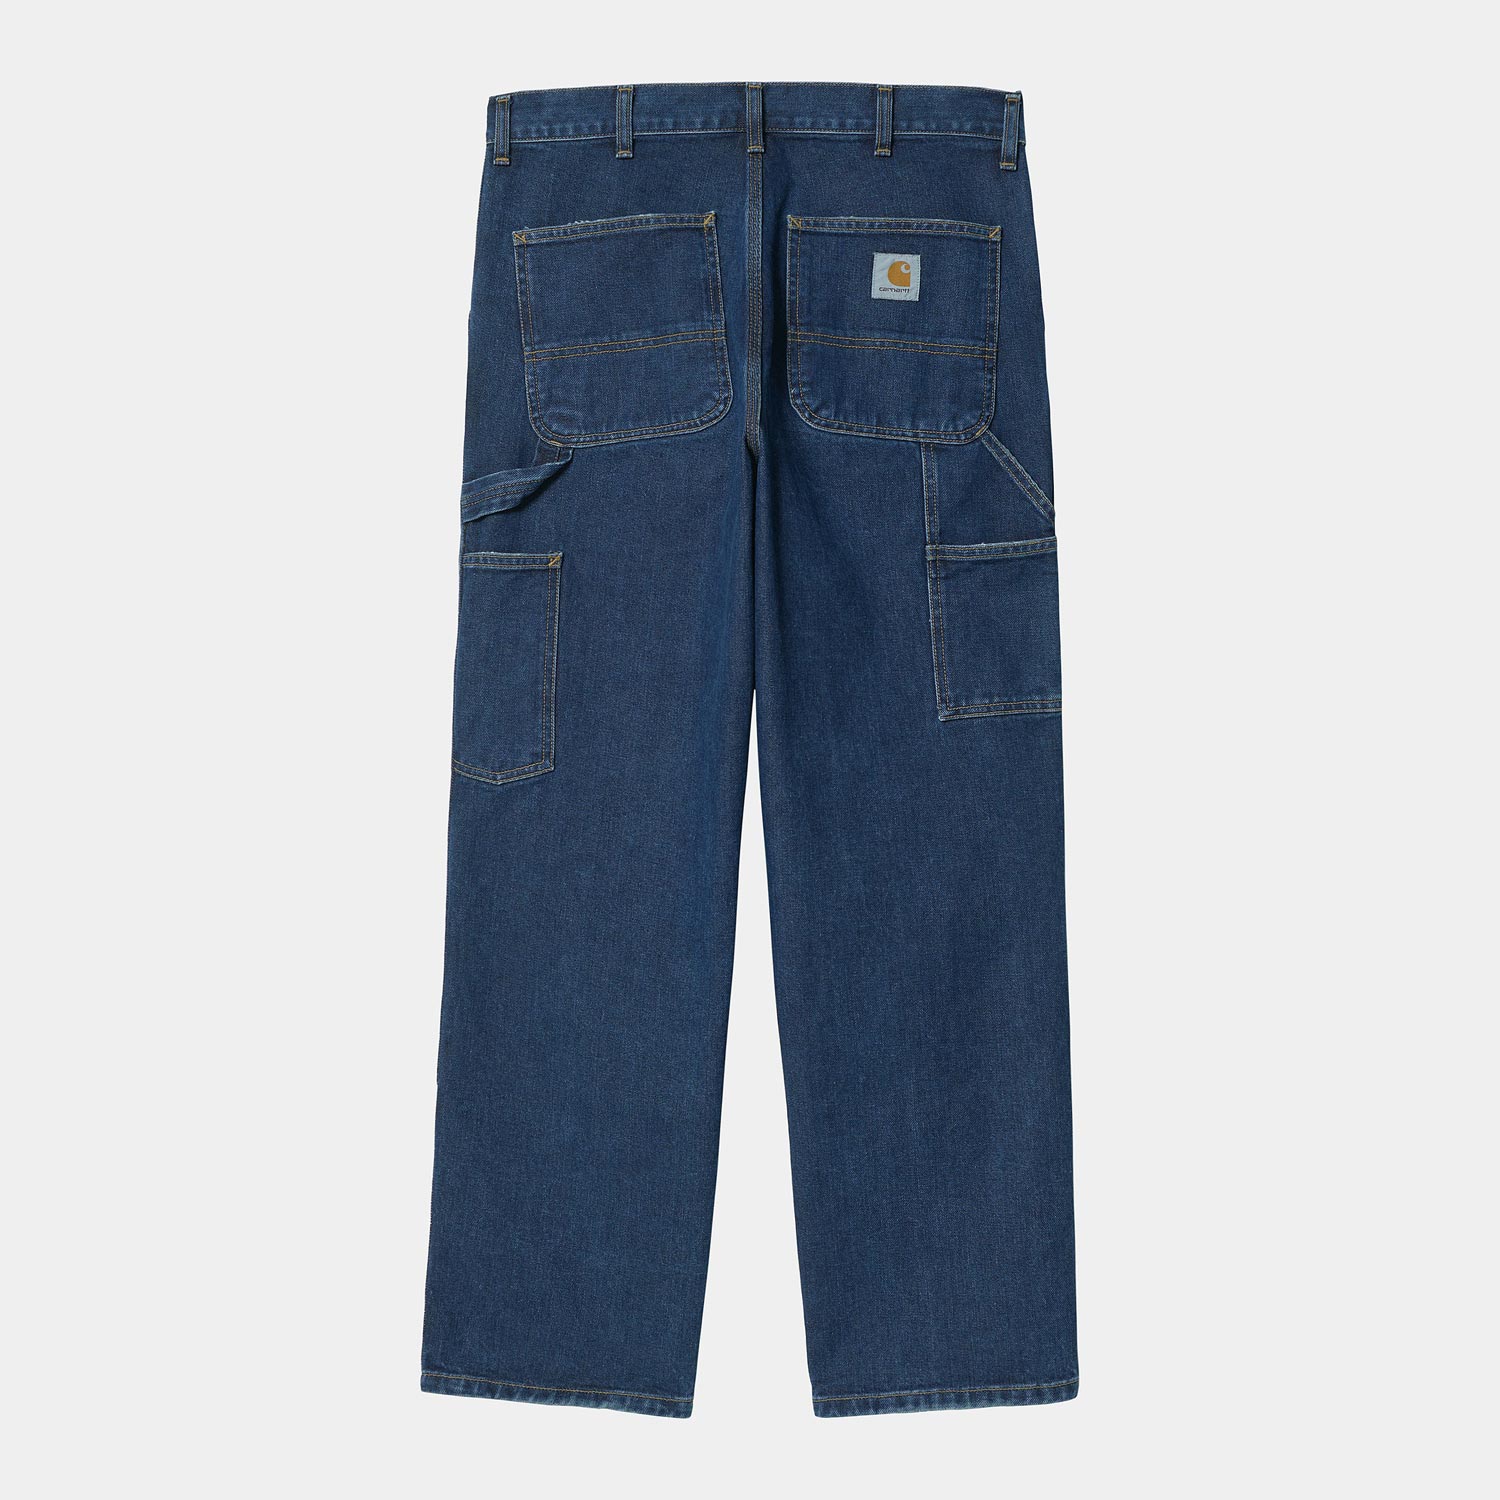 Carhartt WIP Relaxed Fit Double Knee Pant - Blue Stone Washed